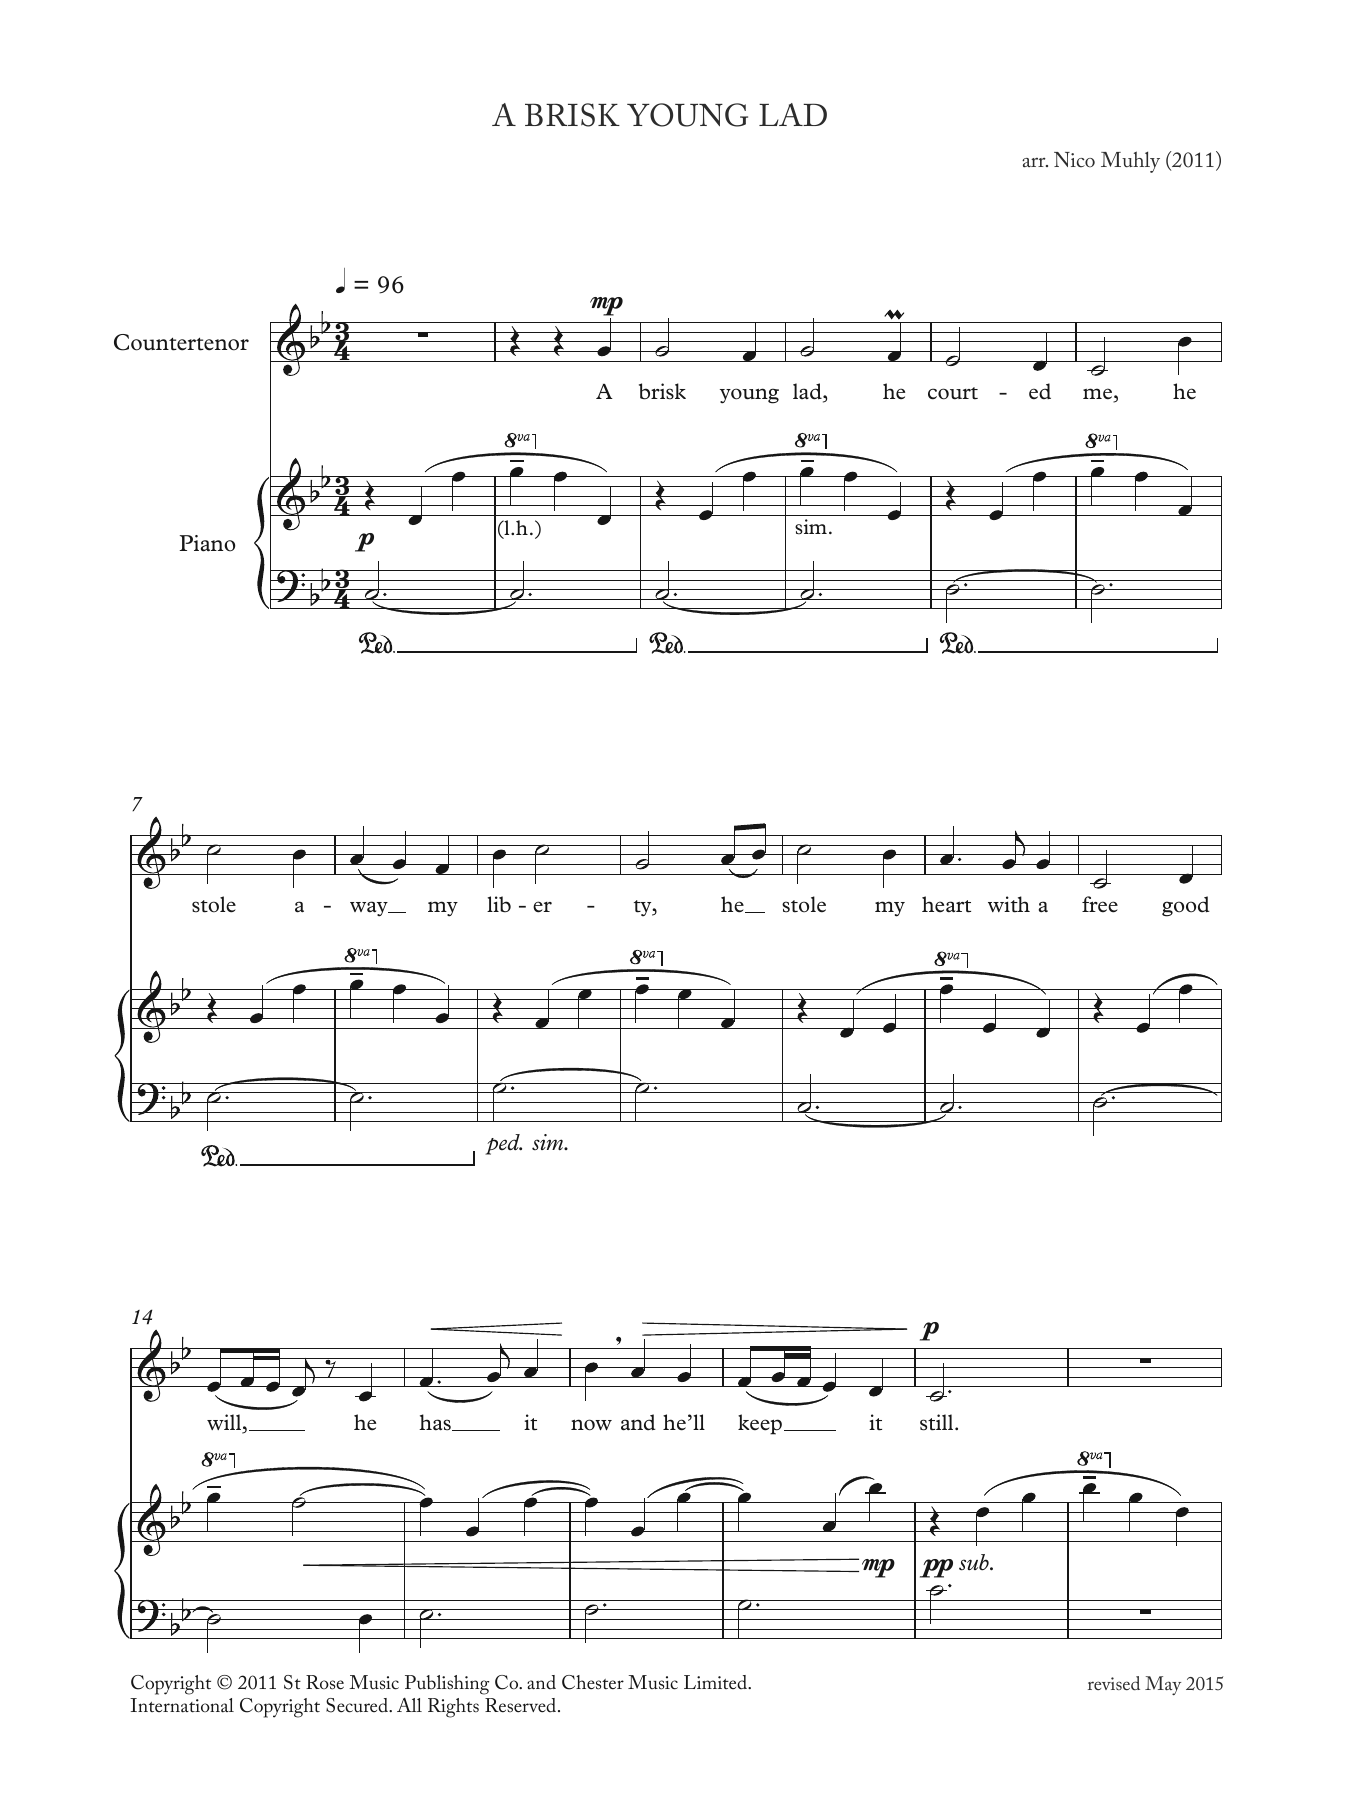 Download Nico Muhly A Brisk Young Lad (from 'Four Tradition Sheet Music